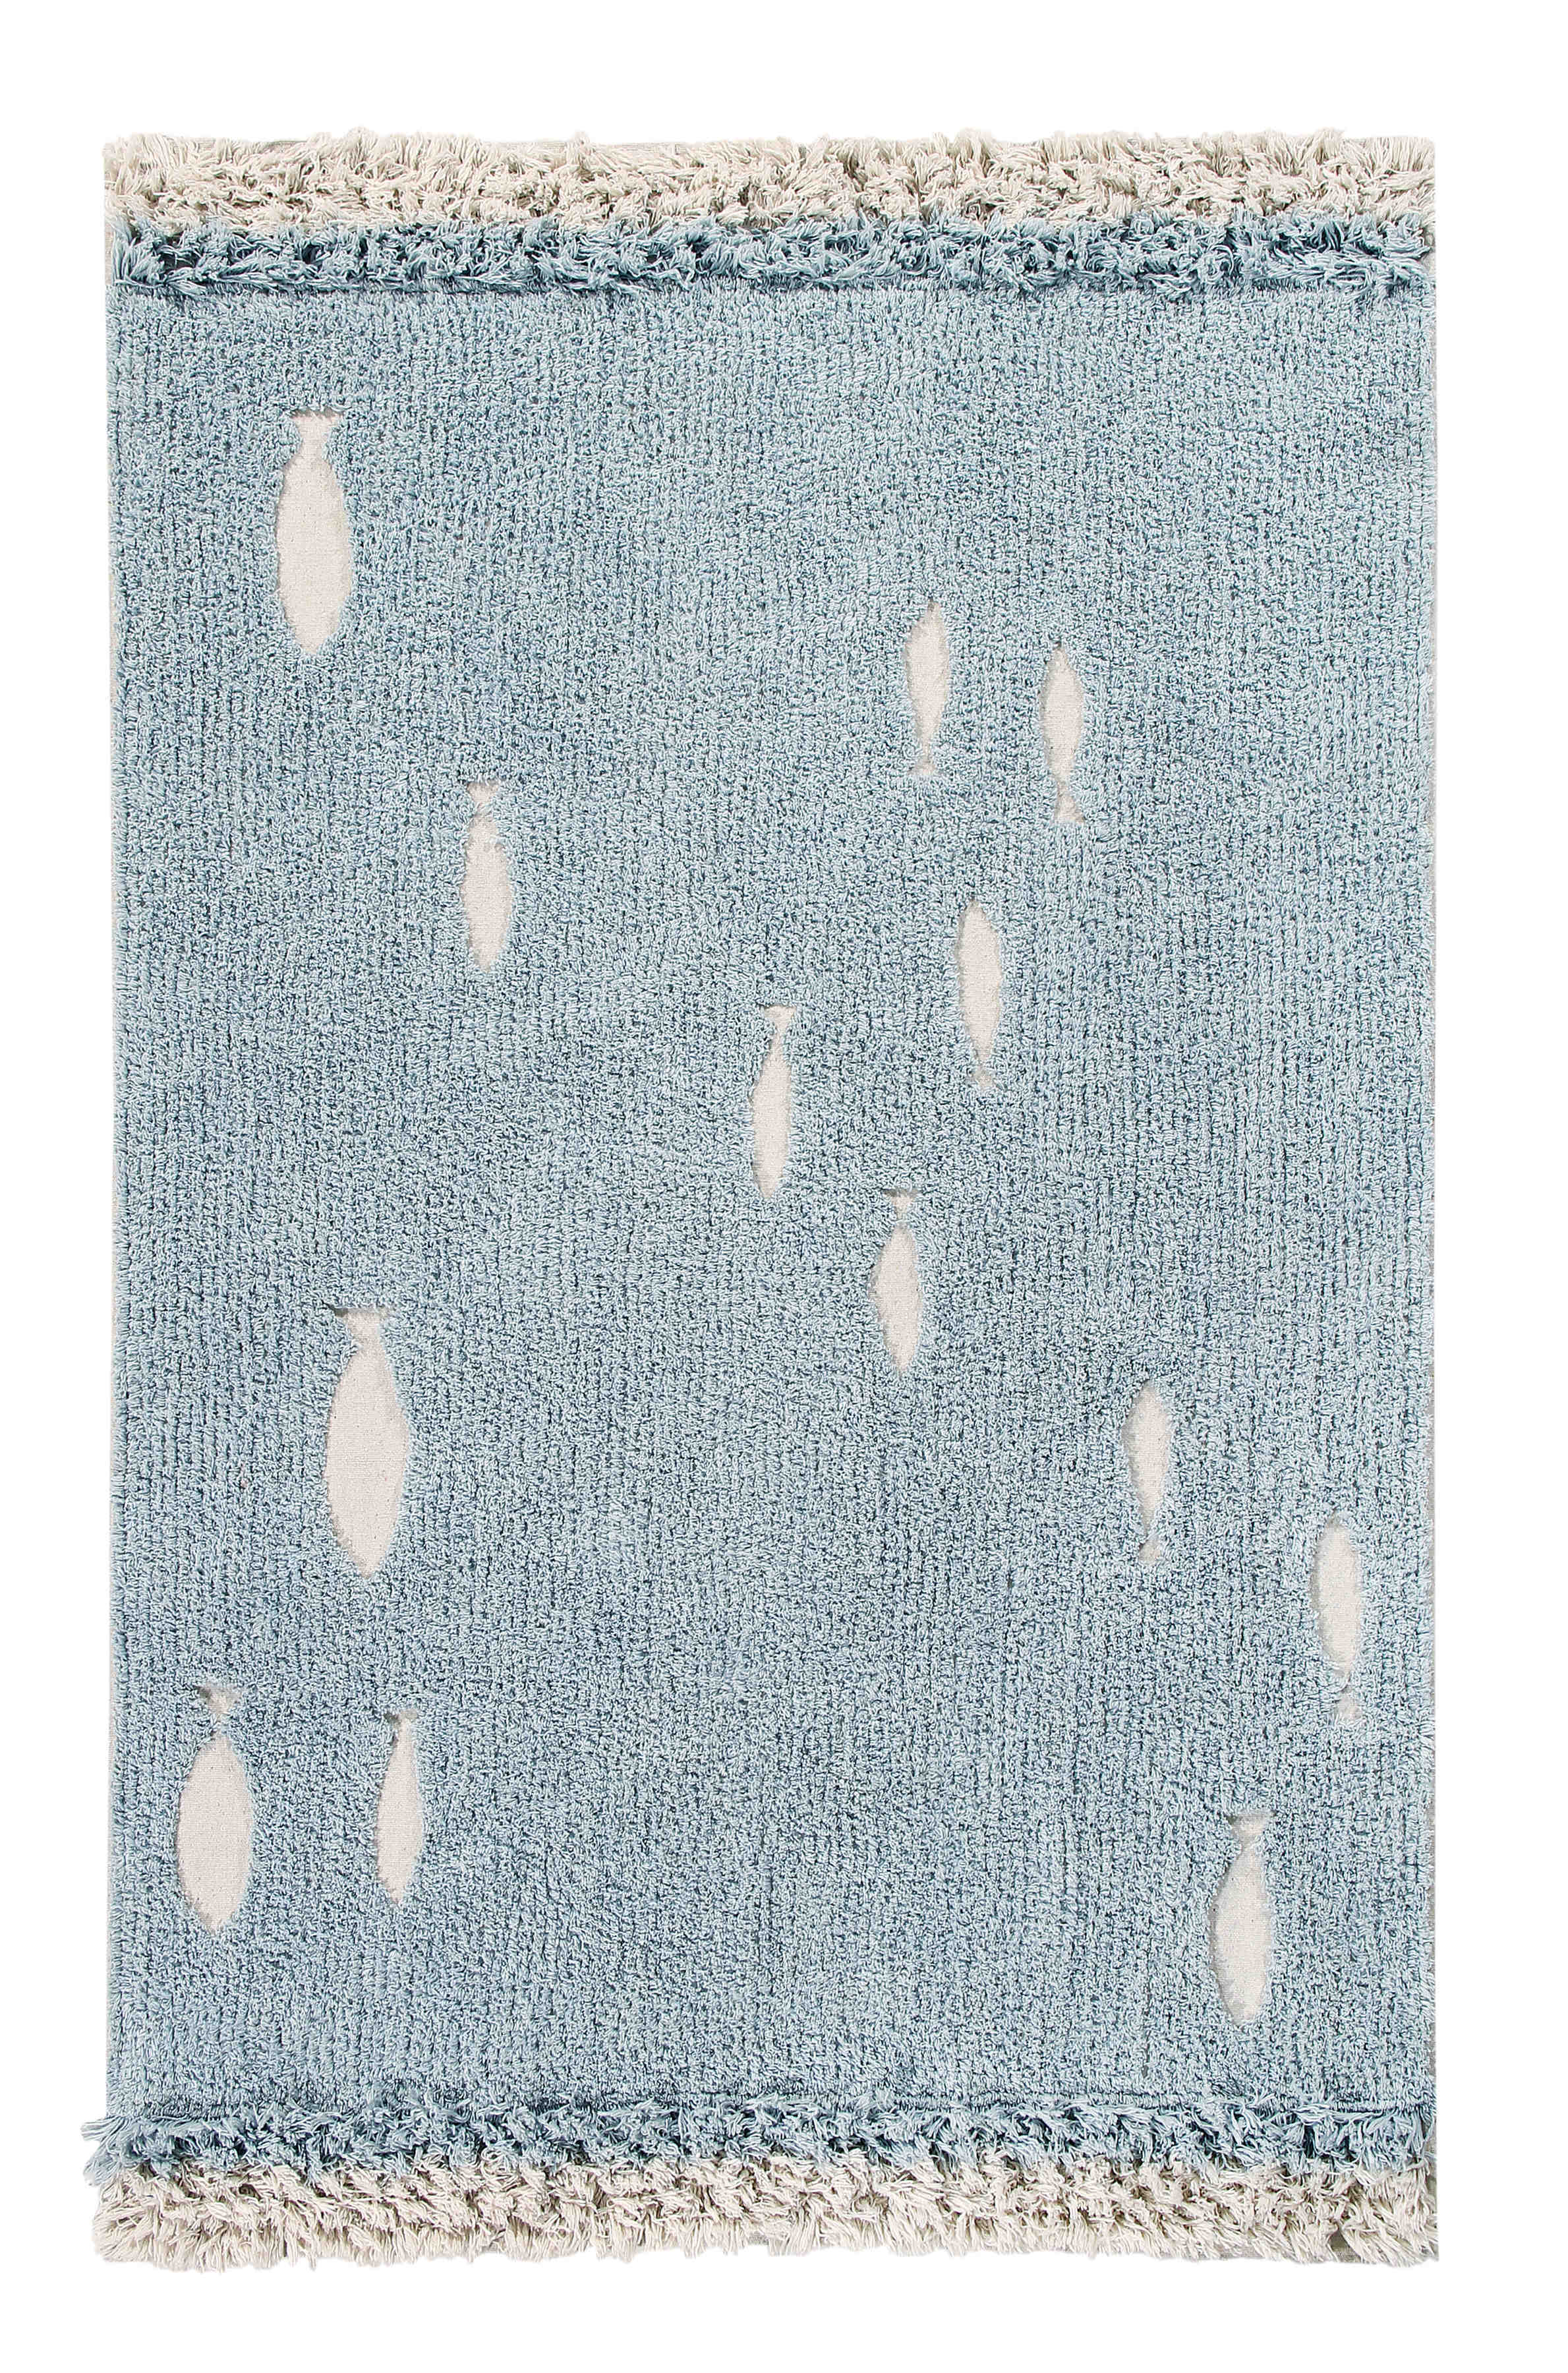 Rectangular blue cotton rug decorated with white fish and blue and beige fringe